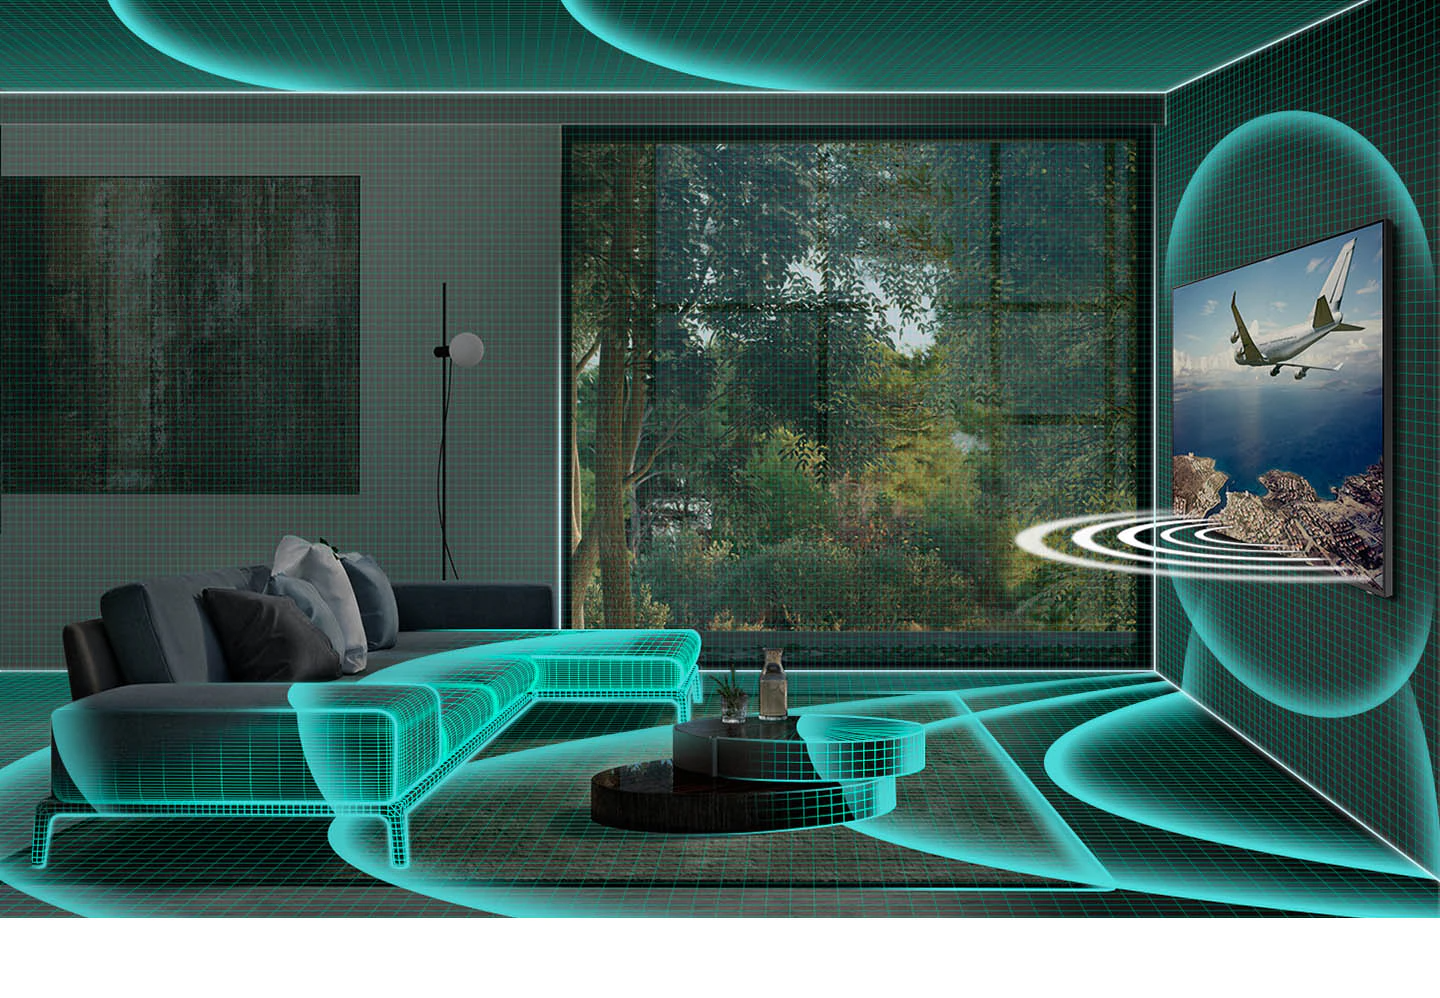 Soundwave graphics projecting from wall-mounted TV are spreading across the living room interior to demonstrate SpaceFit Sound room-analyzing capability.